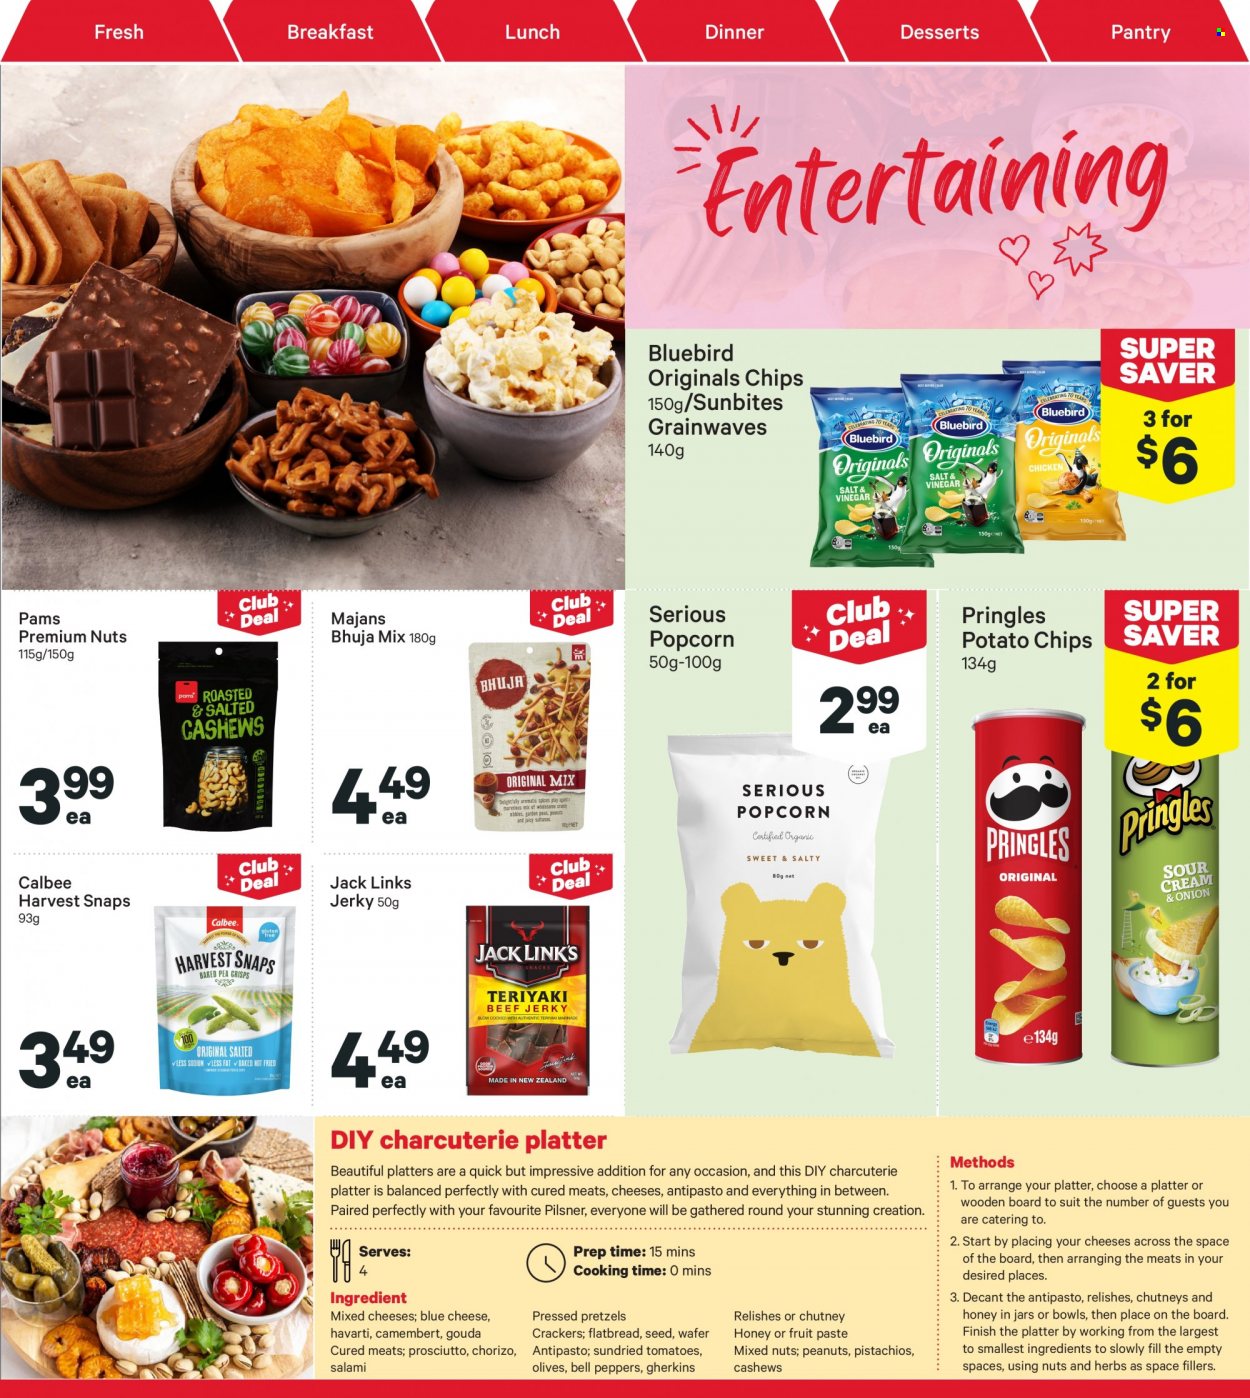 thumbnail - New World mailer - 30.01.2023 - 05.02.2023 - Sales products - pretzels, flatbread, salami, jerky, prosciutto, chorizo, blue cheese, camembert, gouda, Havarti, cheese, wafers, crackers, potato chips, Pringles, chips, Bluebird, popcorn, Sunbites, Harvest Snaps, olives, cashews, peanuts, pistachios, mixed nuts, jar. Page 37.